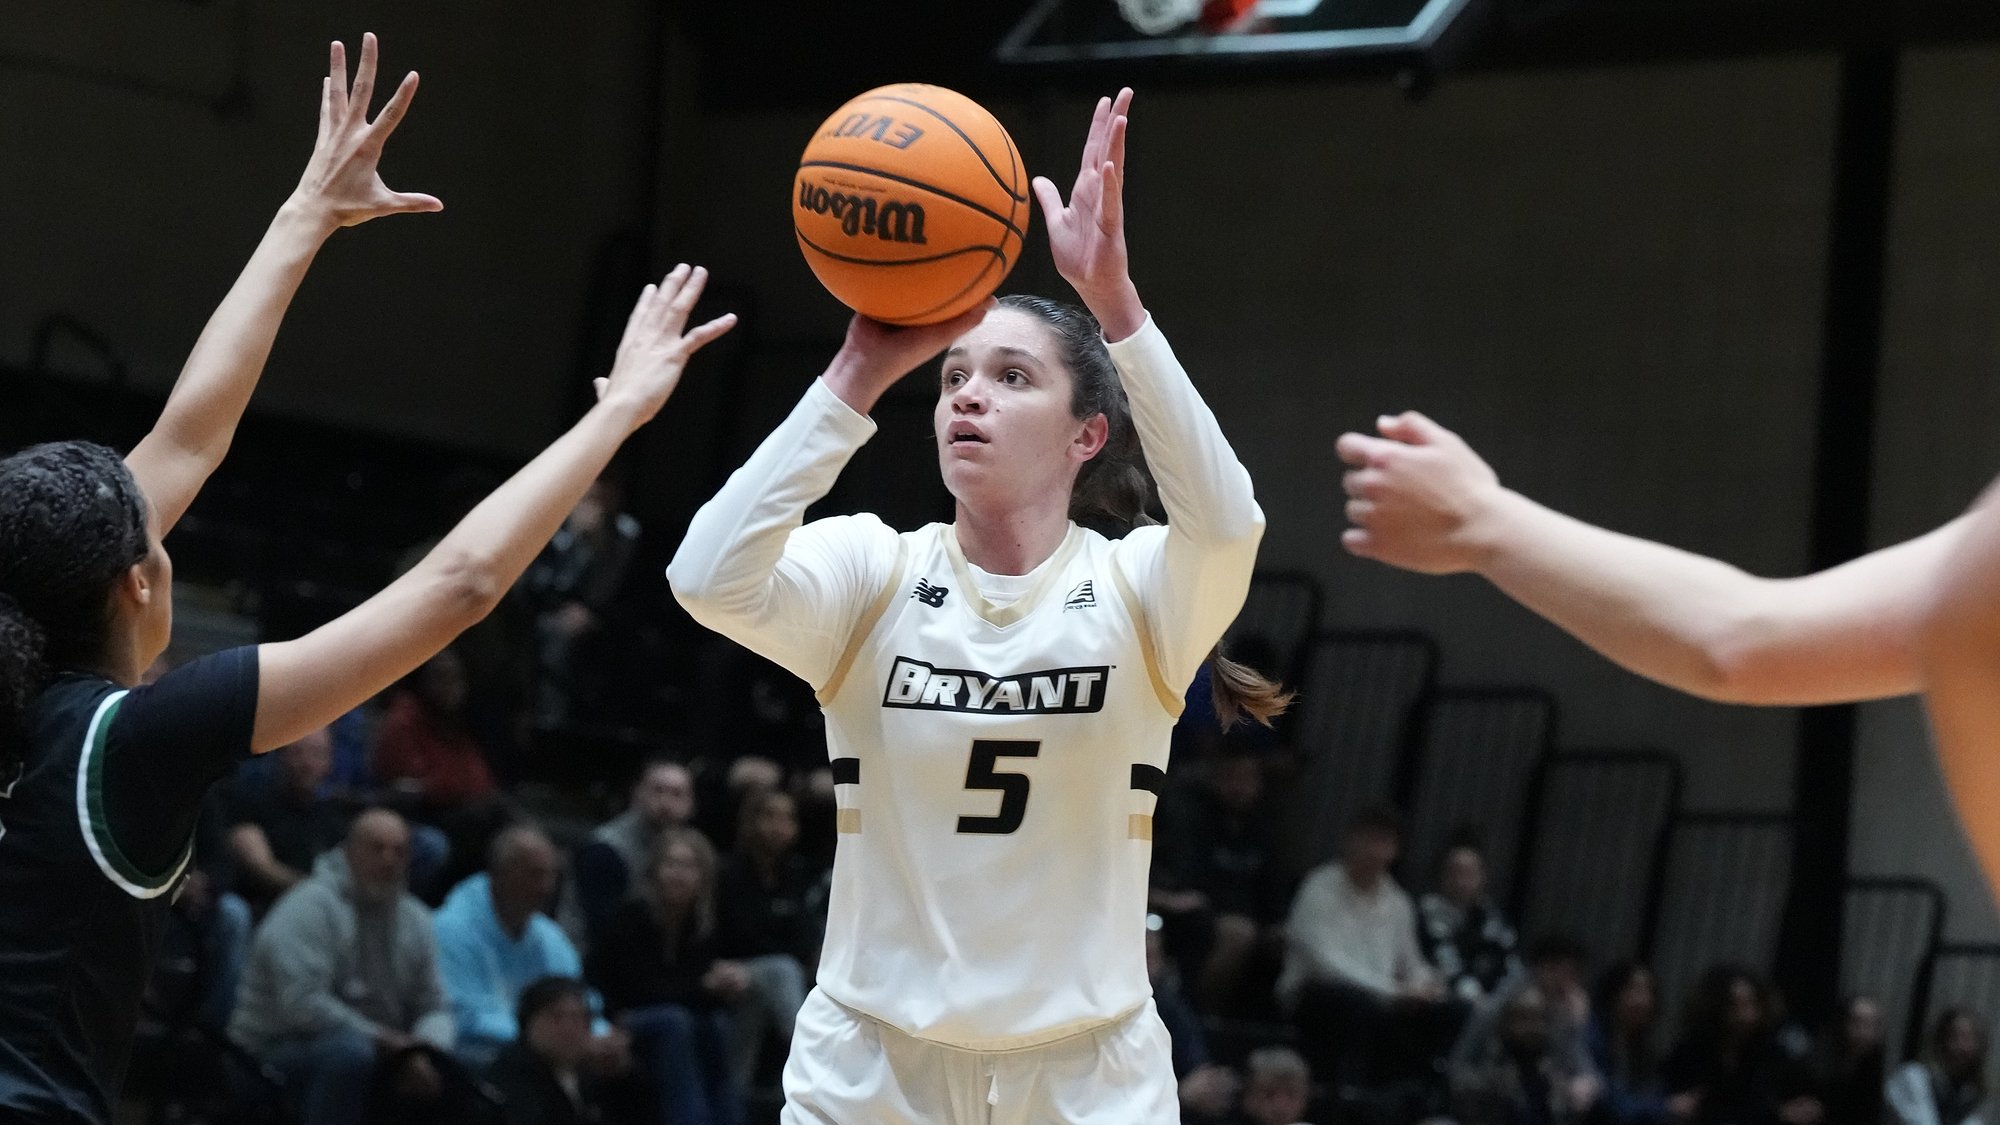 Fortuny records DBL-DBL in home loss to Brown